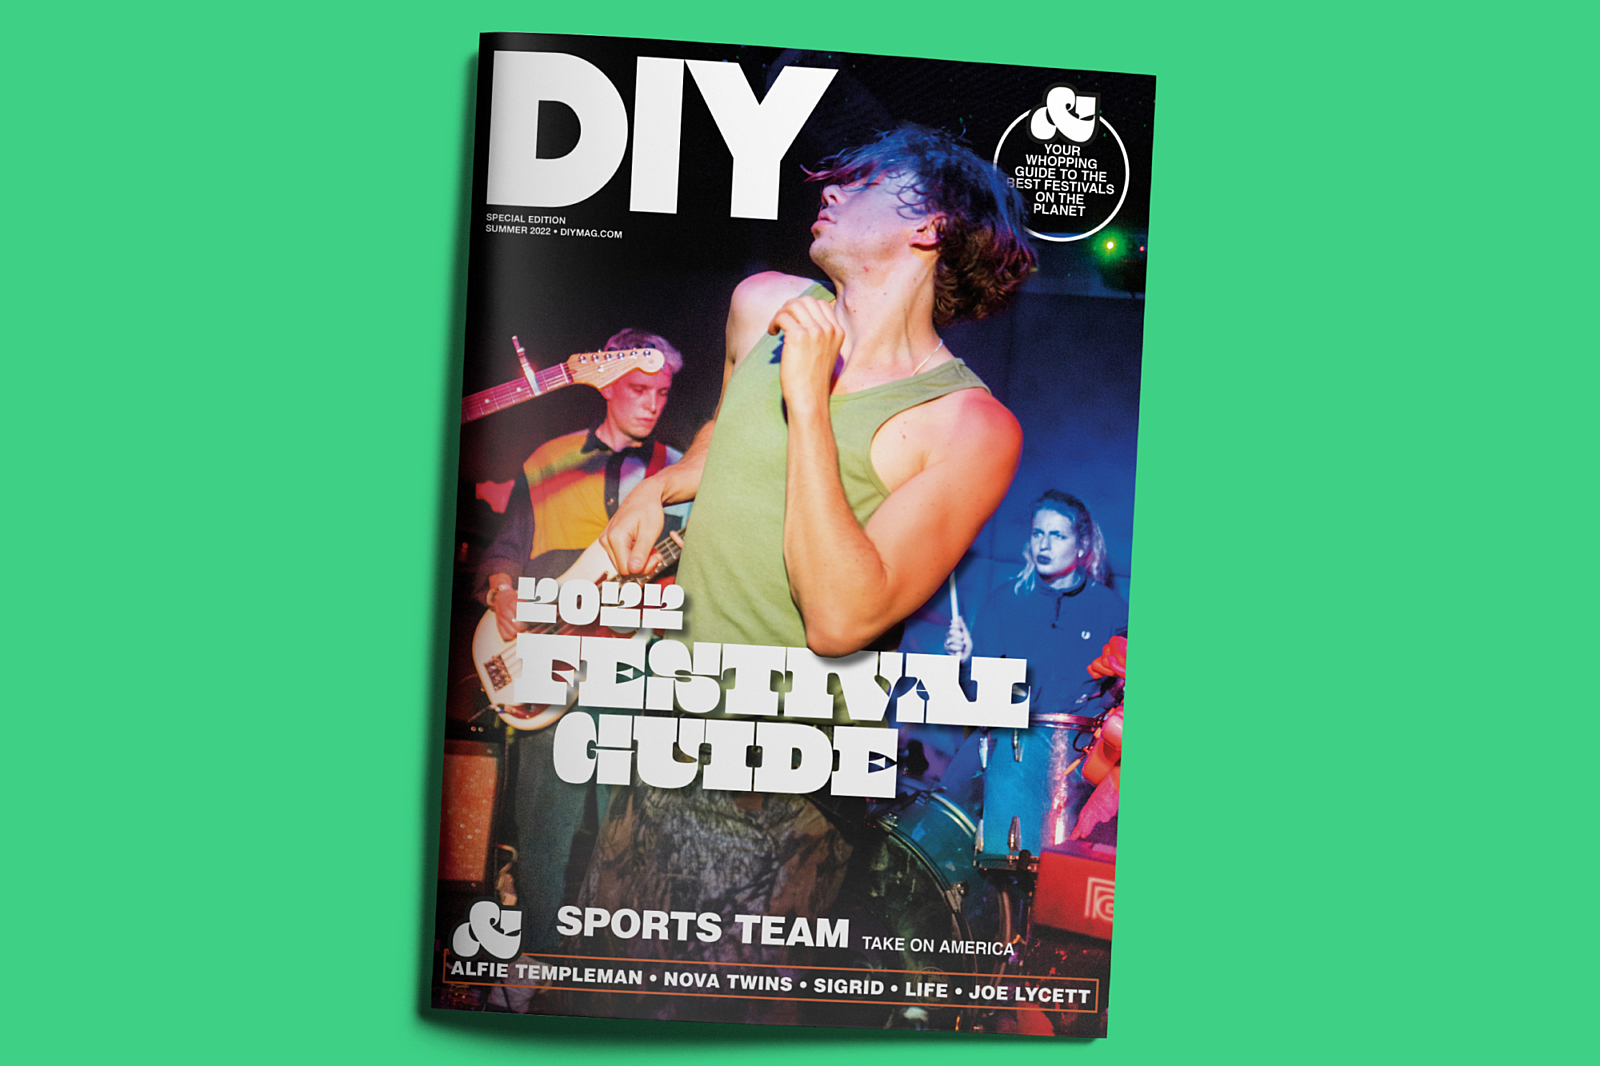 Introducing DIY's 2022 Festival Guide, featuring Sports Team, Nova Twins, Sigrid & more!